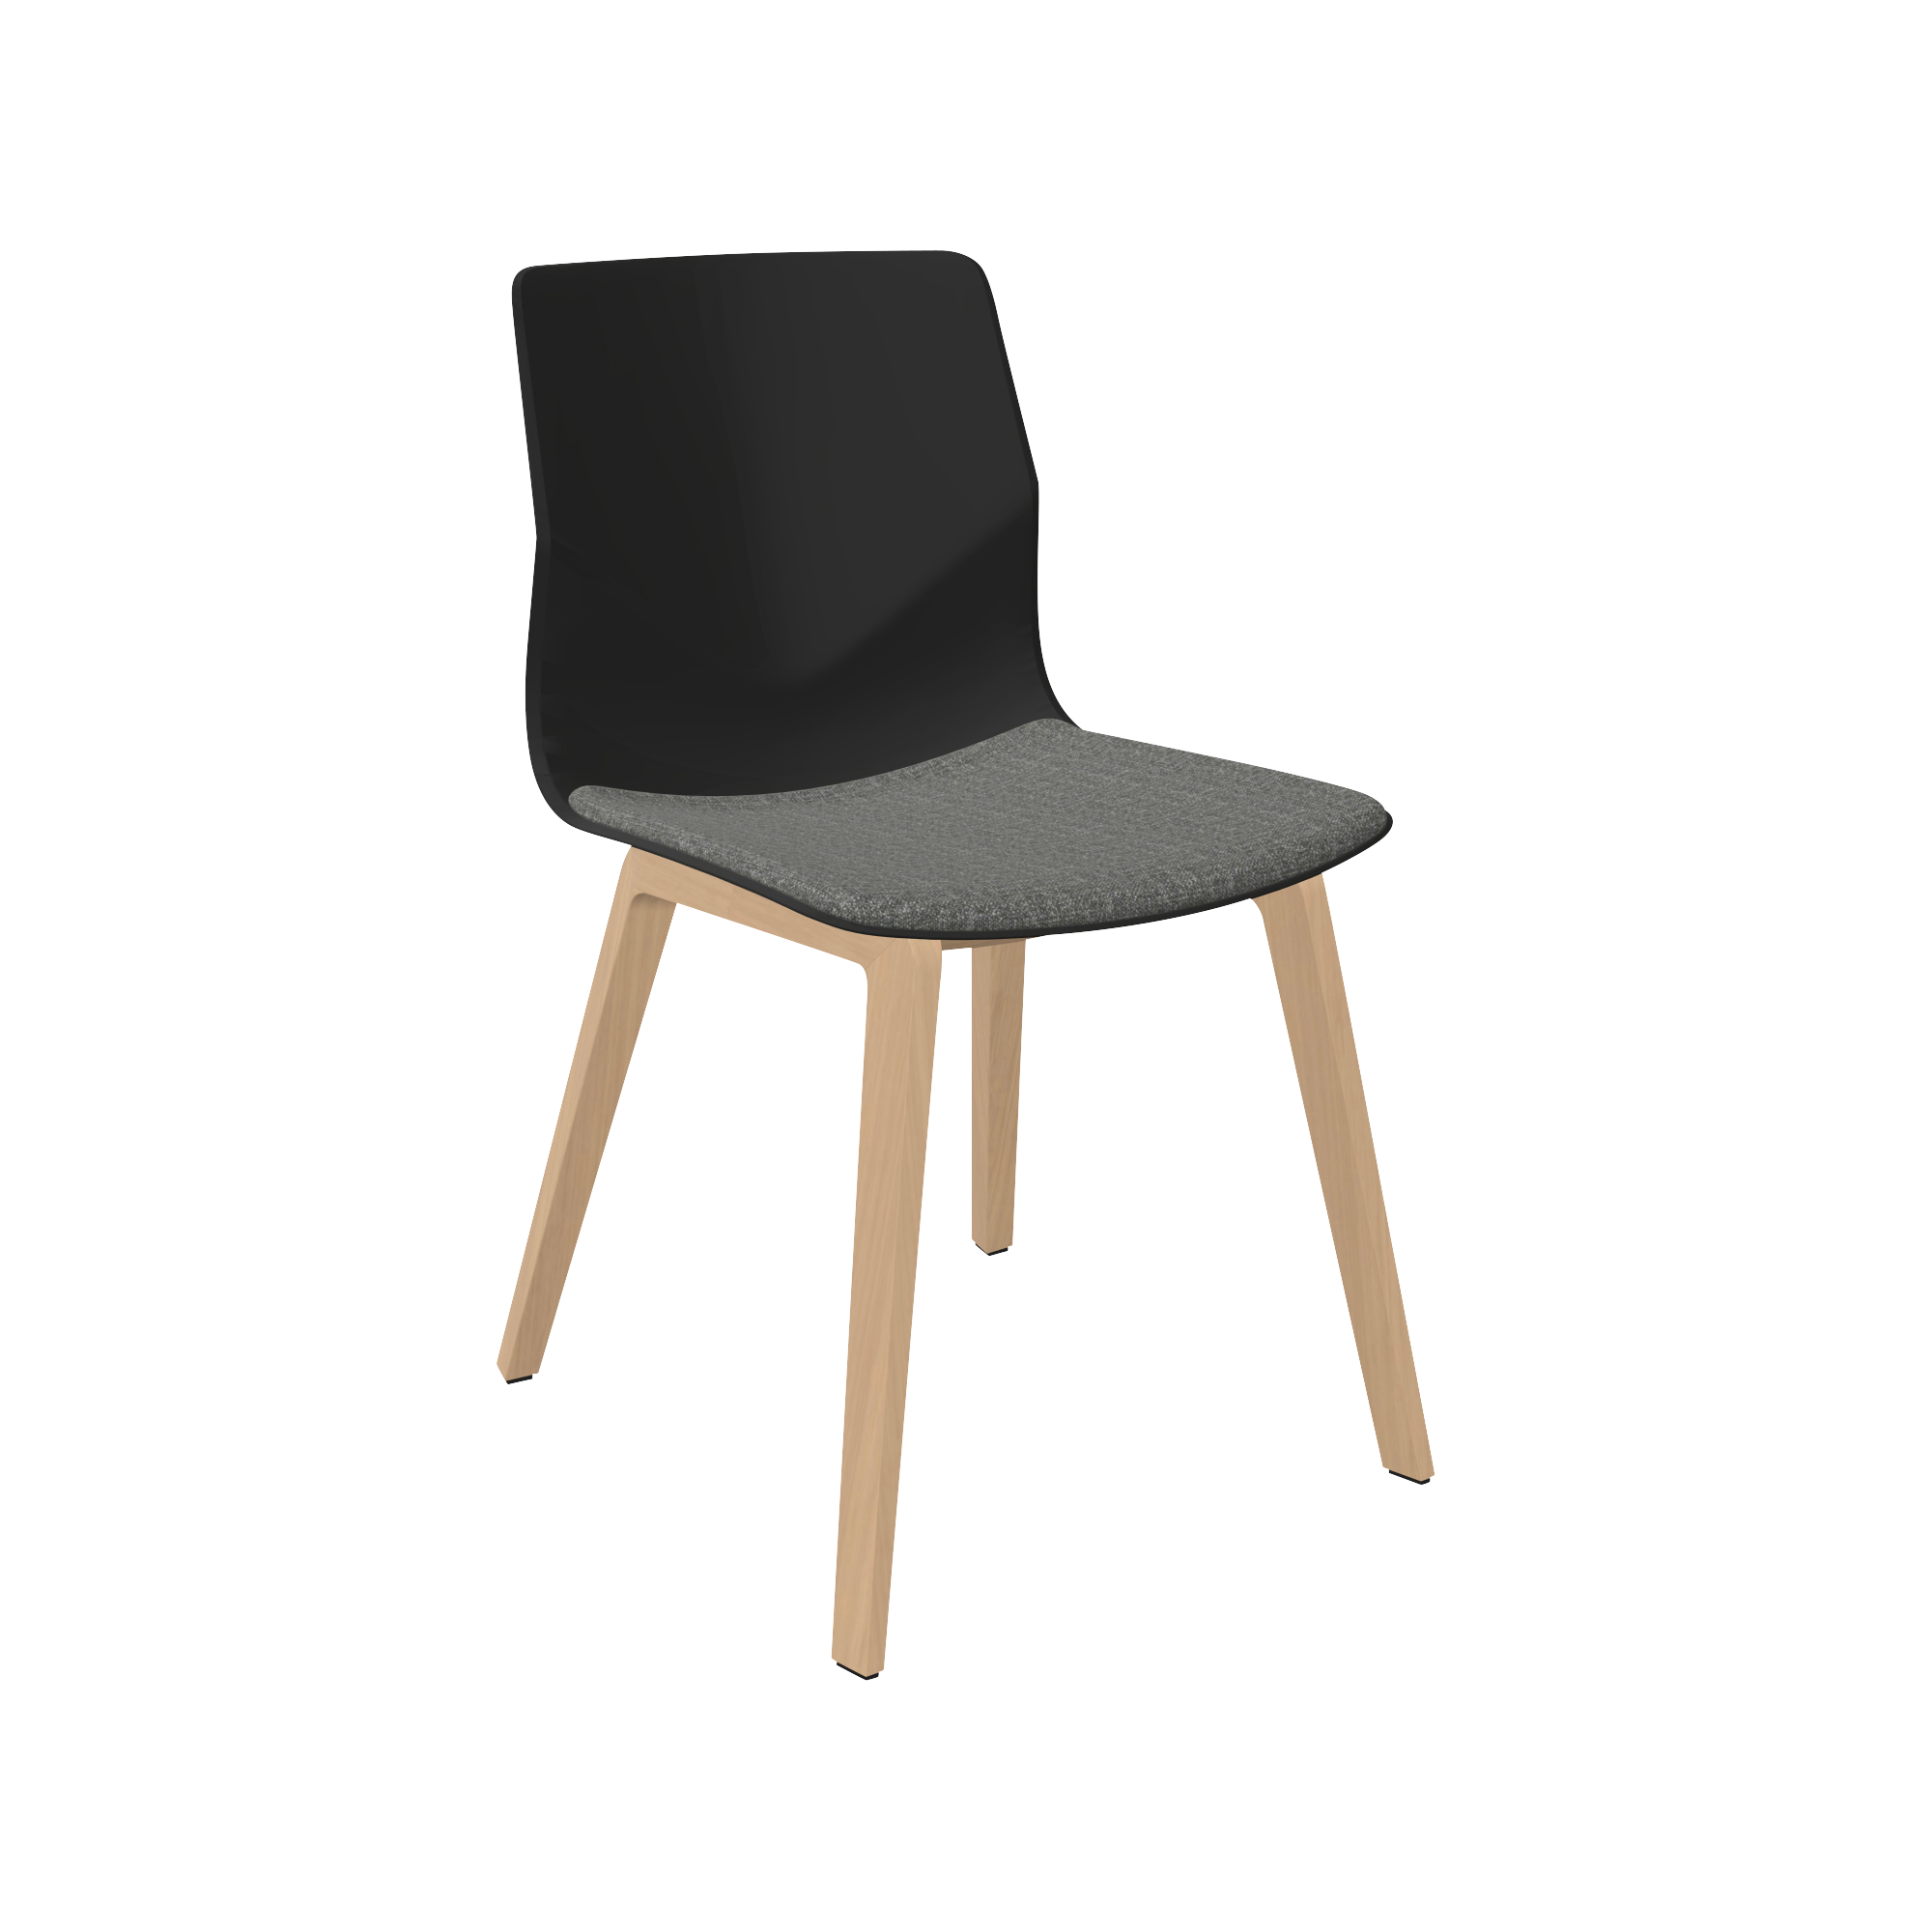 A grey designer desk chair with wooden legs